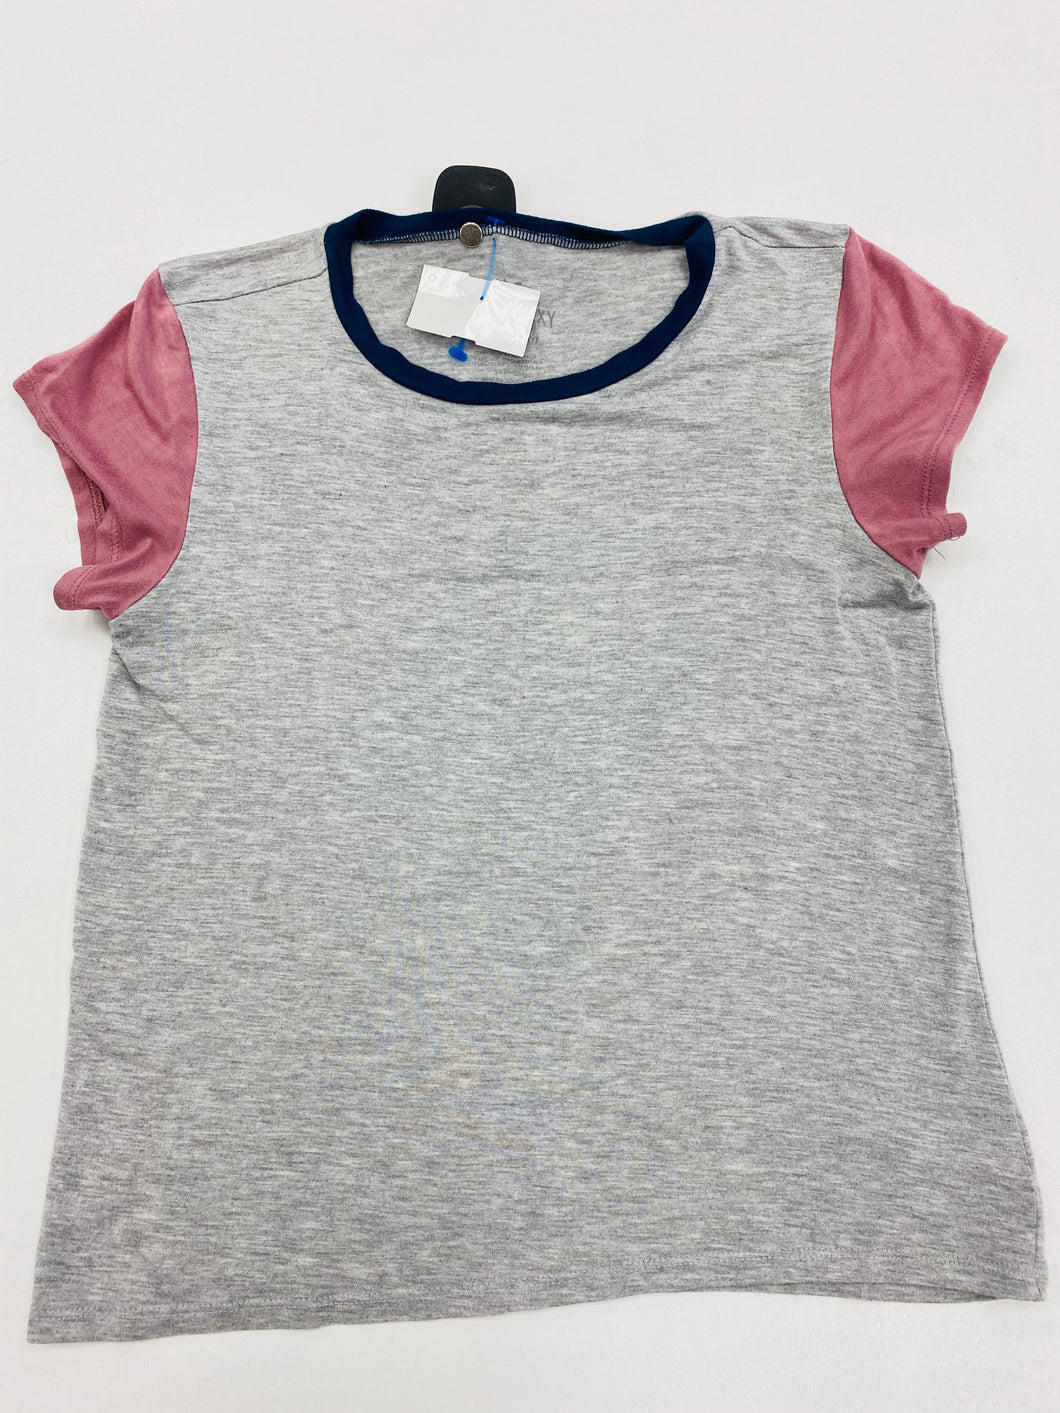 American Eagle Womens Short Sleeve Top Size Small